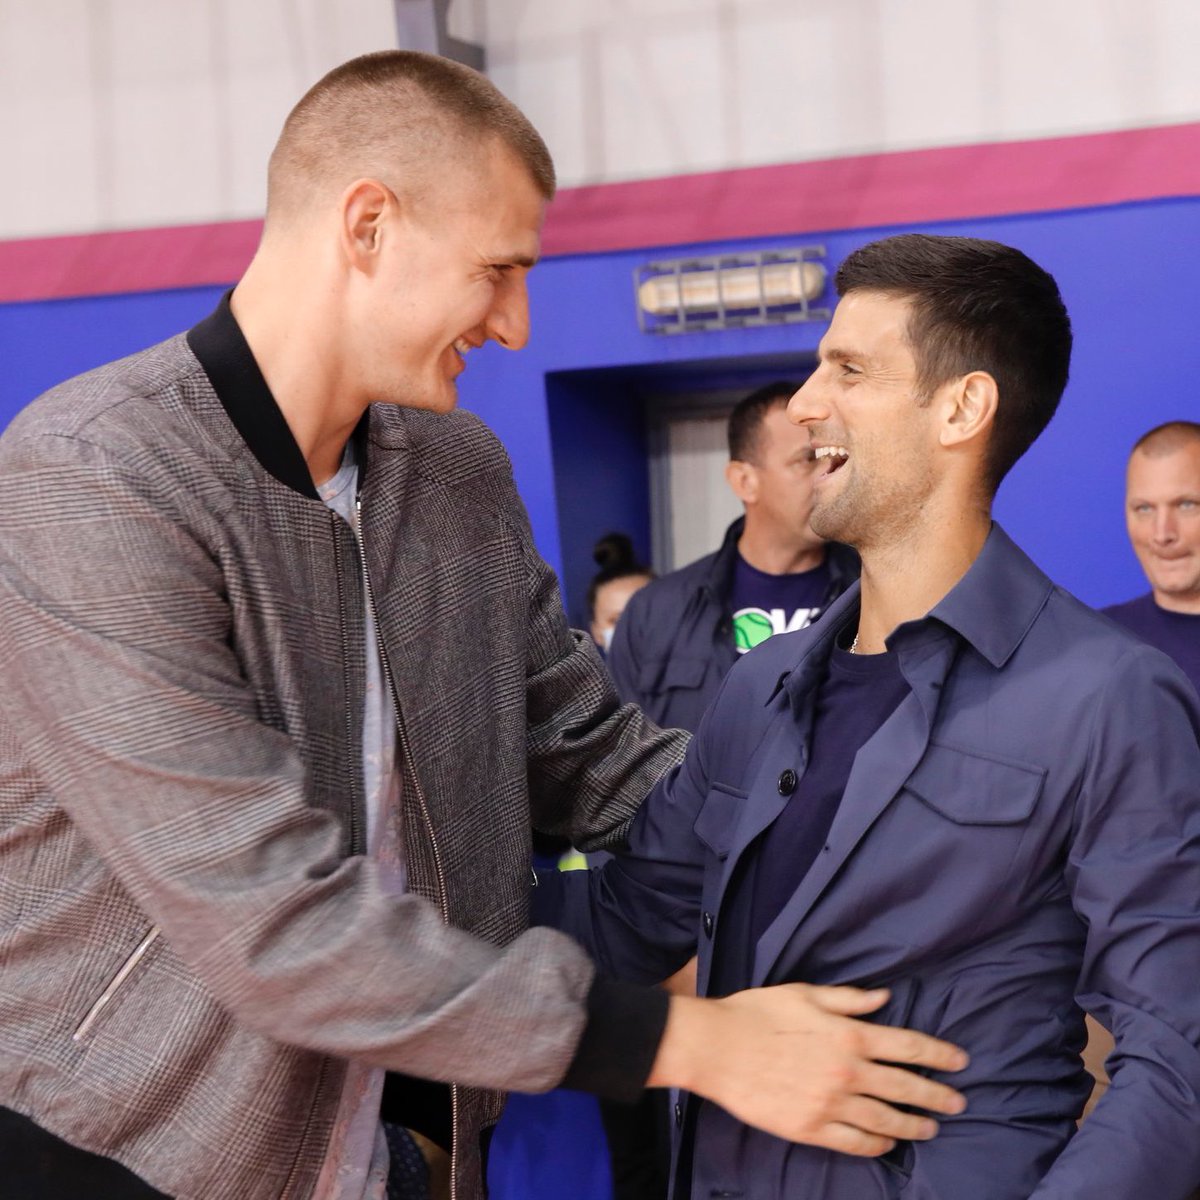 It's pretty crazy that Serbia is responsible for just .1% of the world's population, yet they produced two of the world's most dominant athletes today: Novak Djokovic & Nikola Jokić.